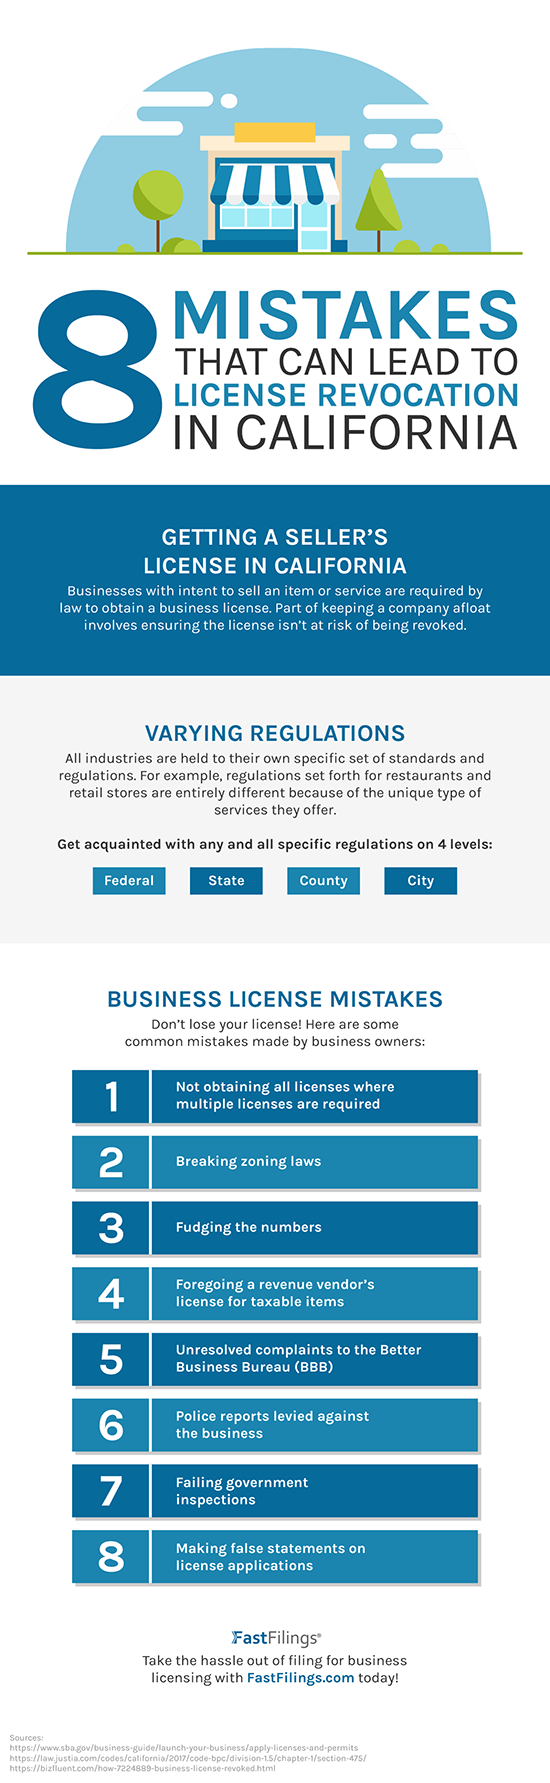 8 Mistakes That Can Lead to License Revocation in California